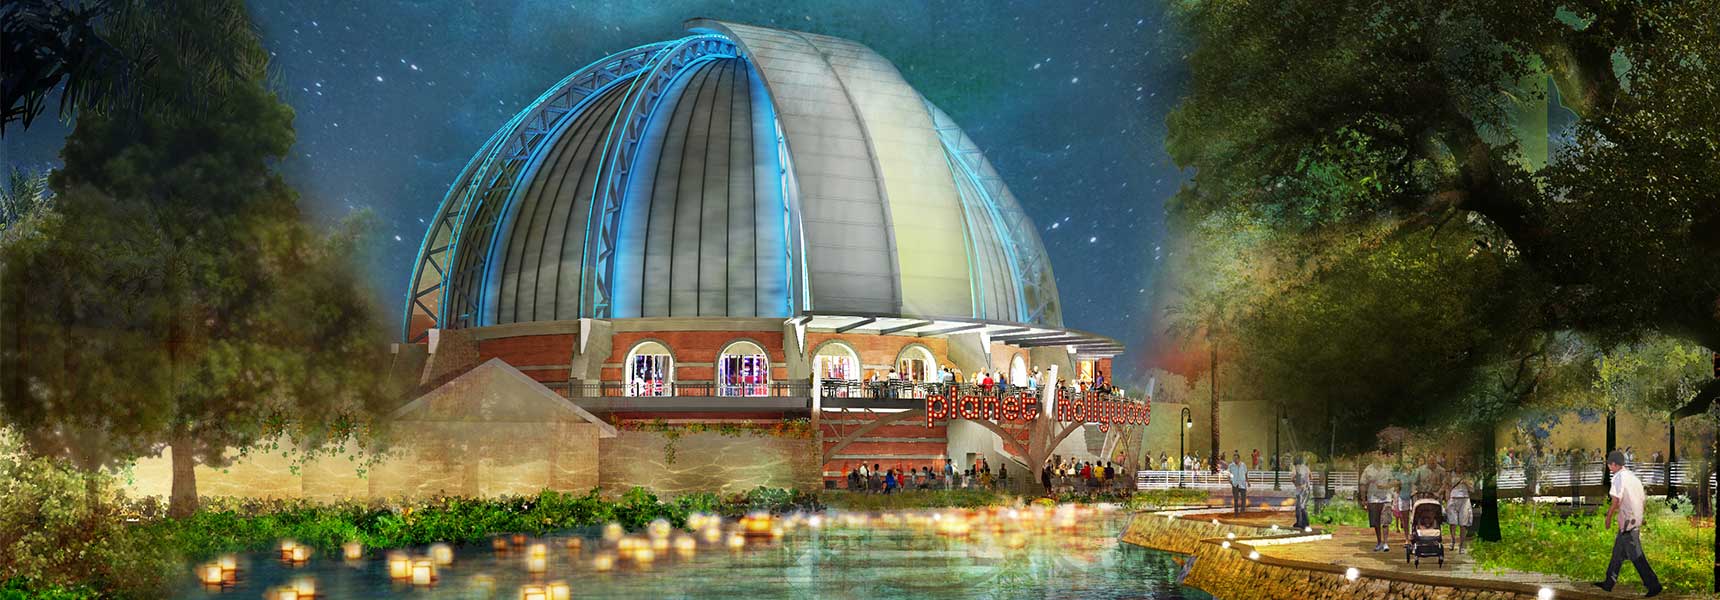 Planet Hollywood Orlando Re-Imagined as Early 20th Century Observatory